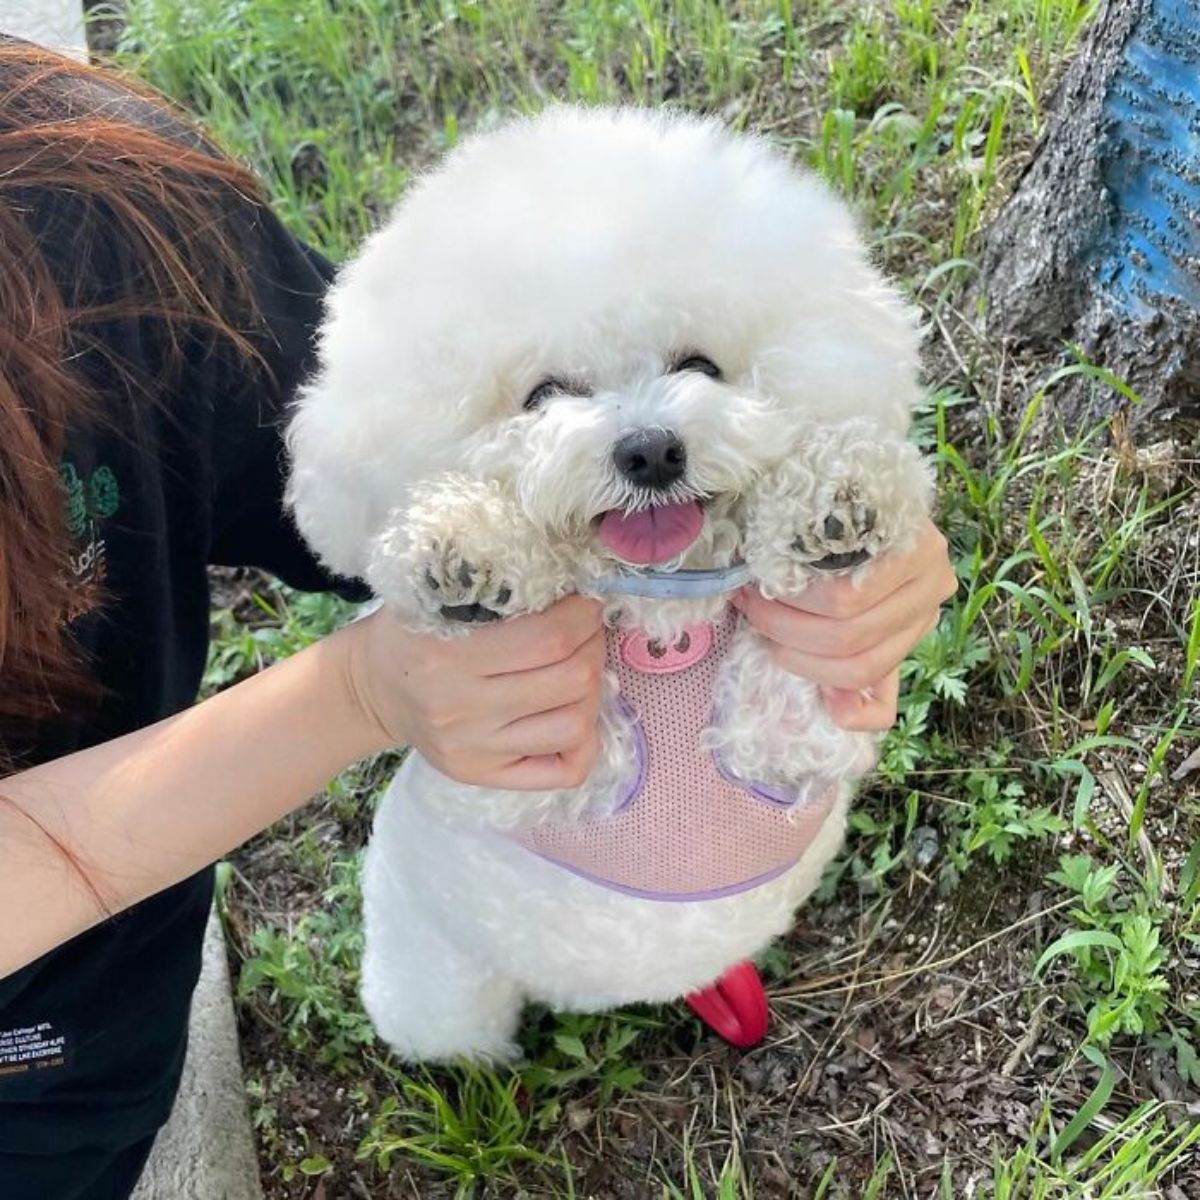 small fluffy white dog with the tongue out being held up by front paws to stand on grass wearing a pink and purple harness